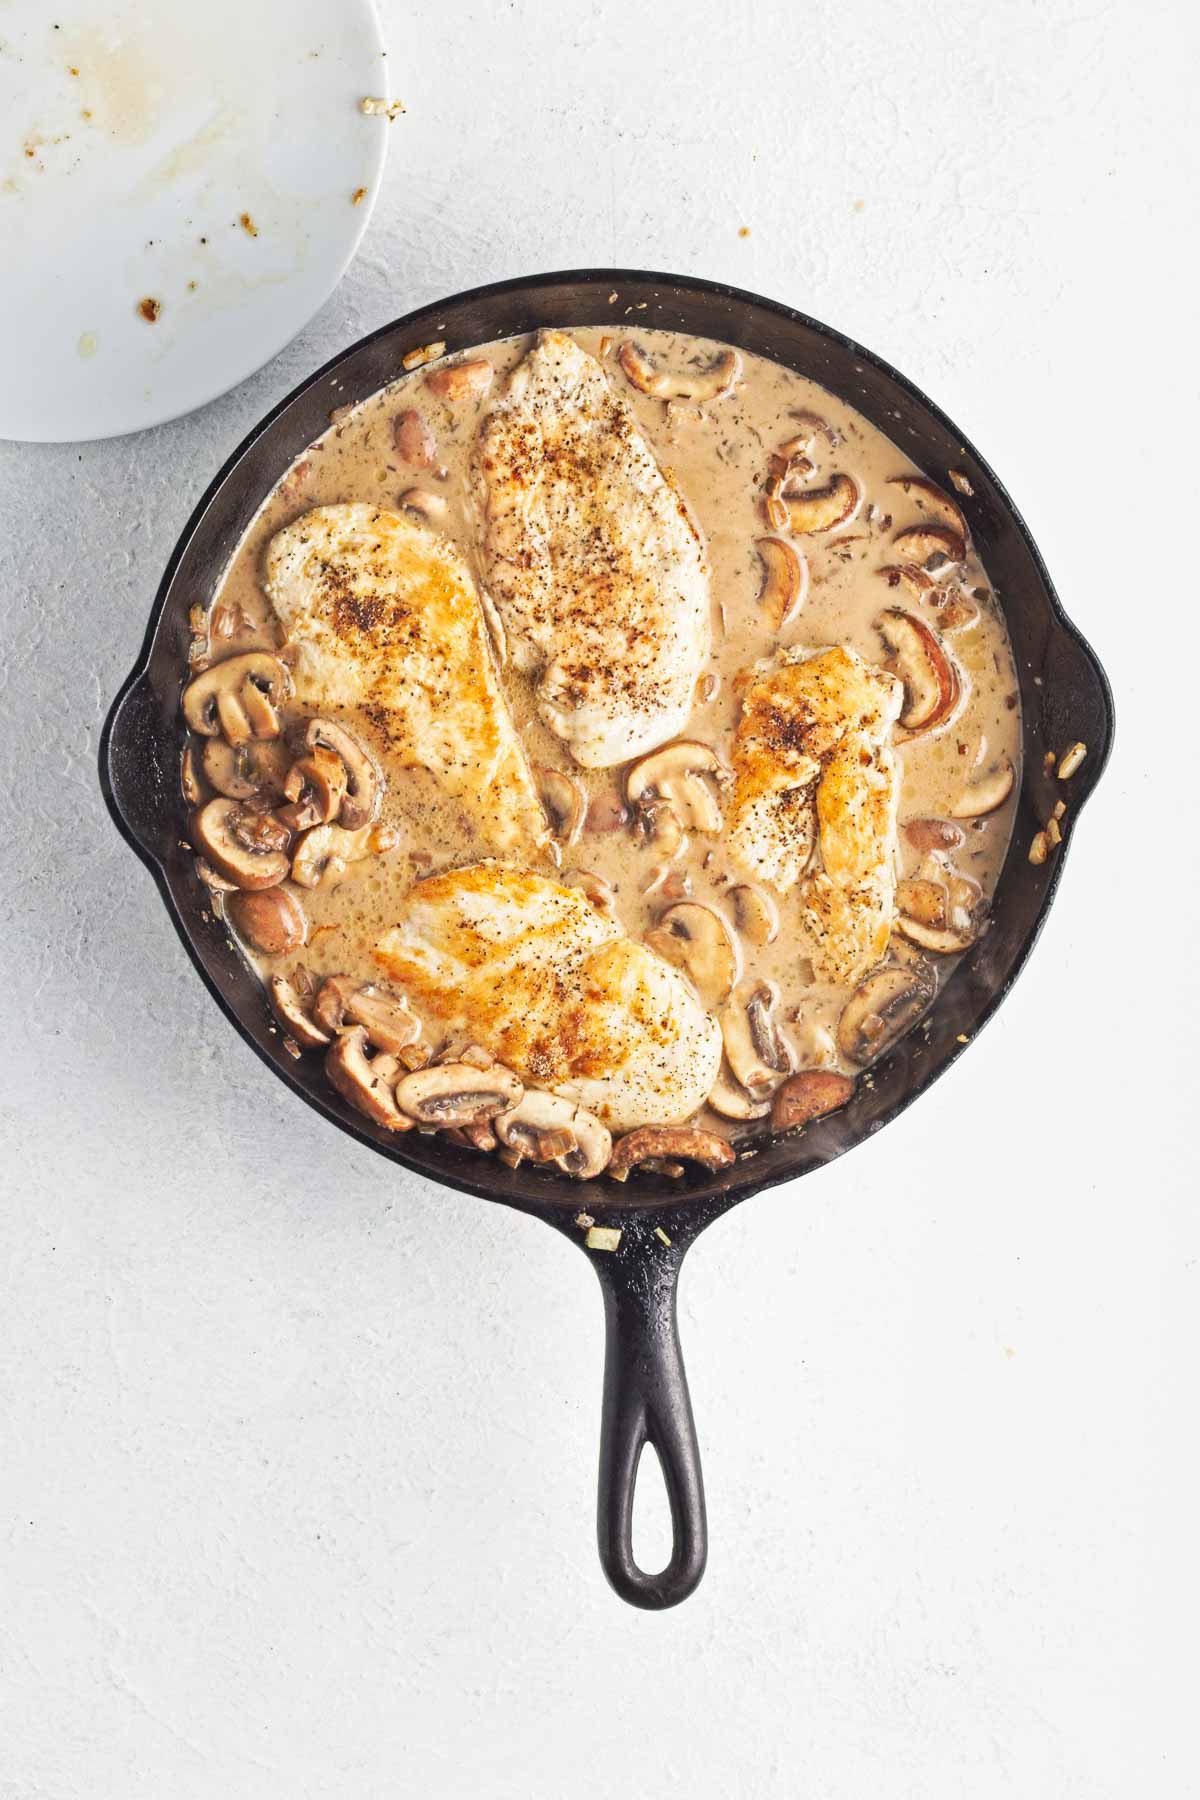 Browned chicken added to the pan with creamy mushroom sauce